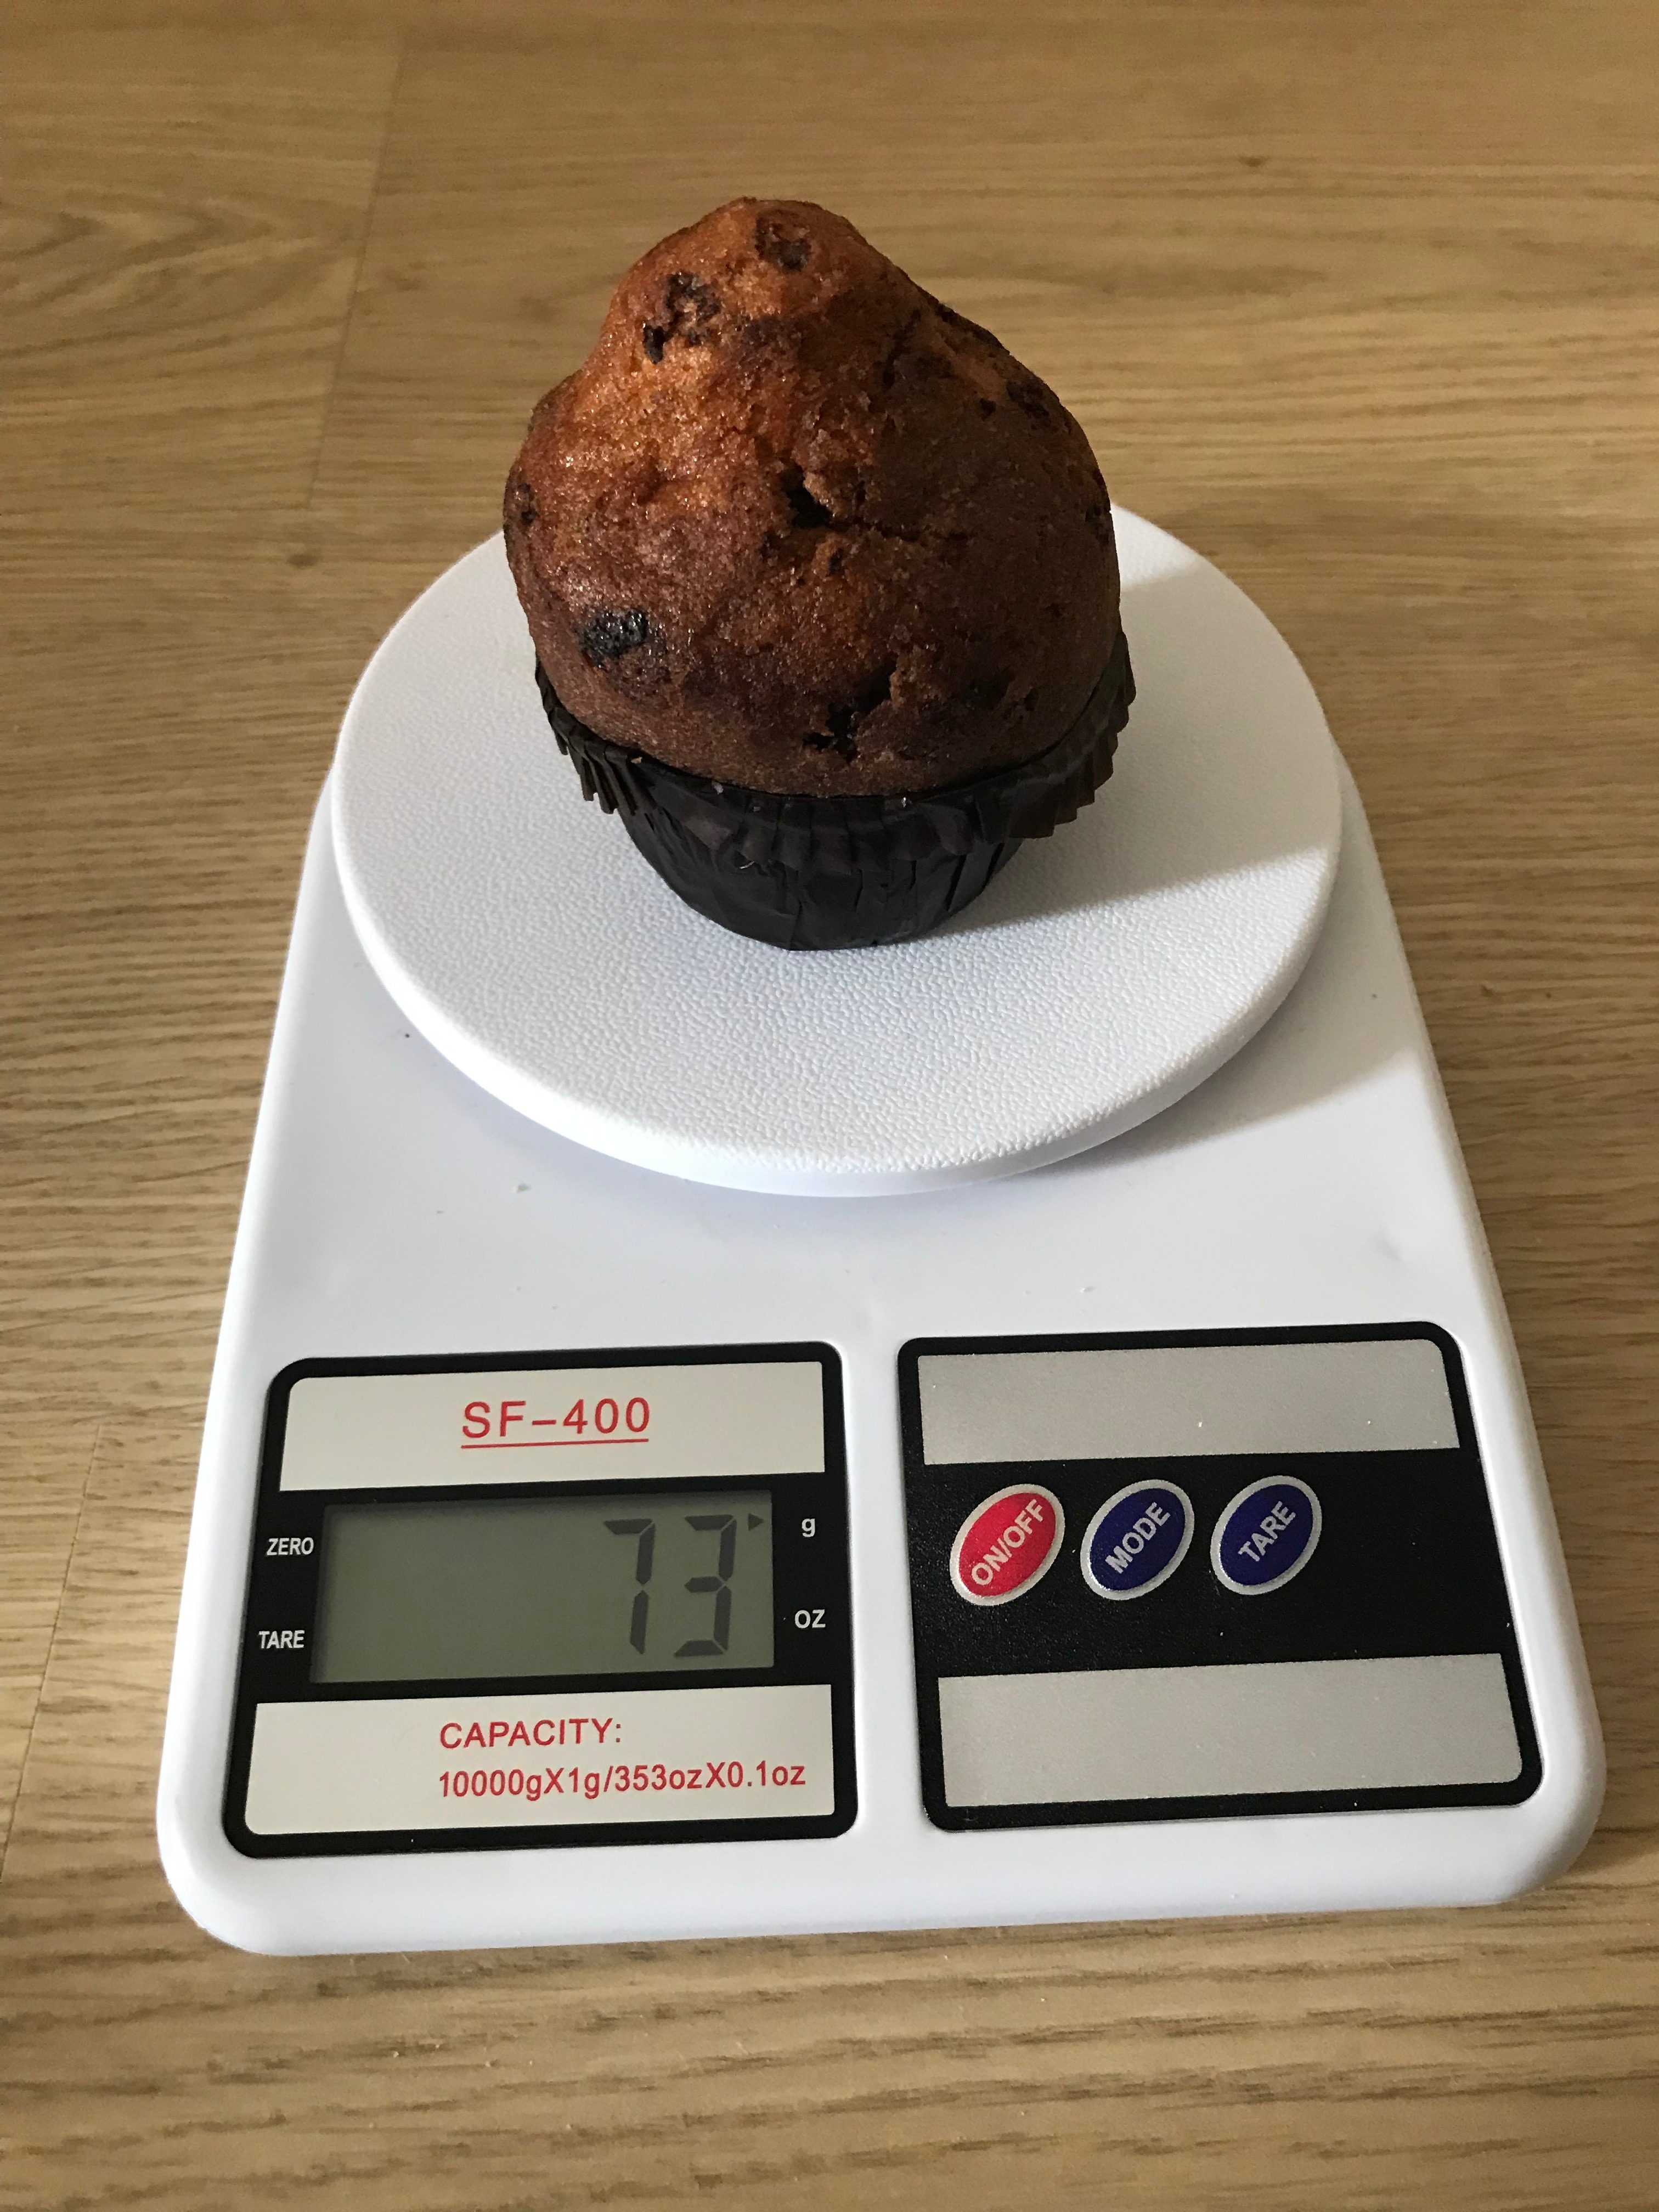 How much does a paper-wrapped chocolate cupcake weigh?